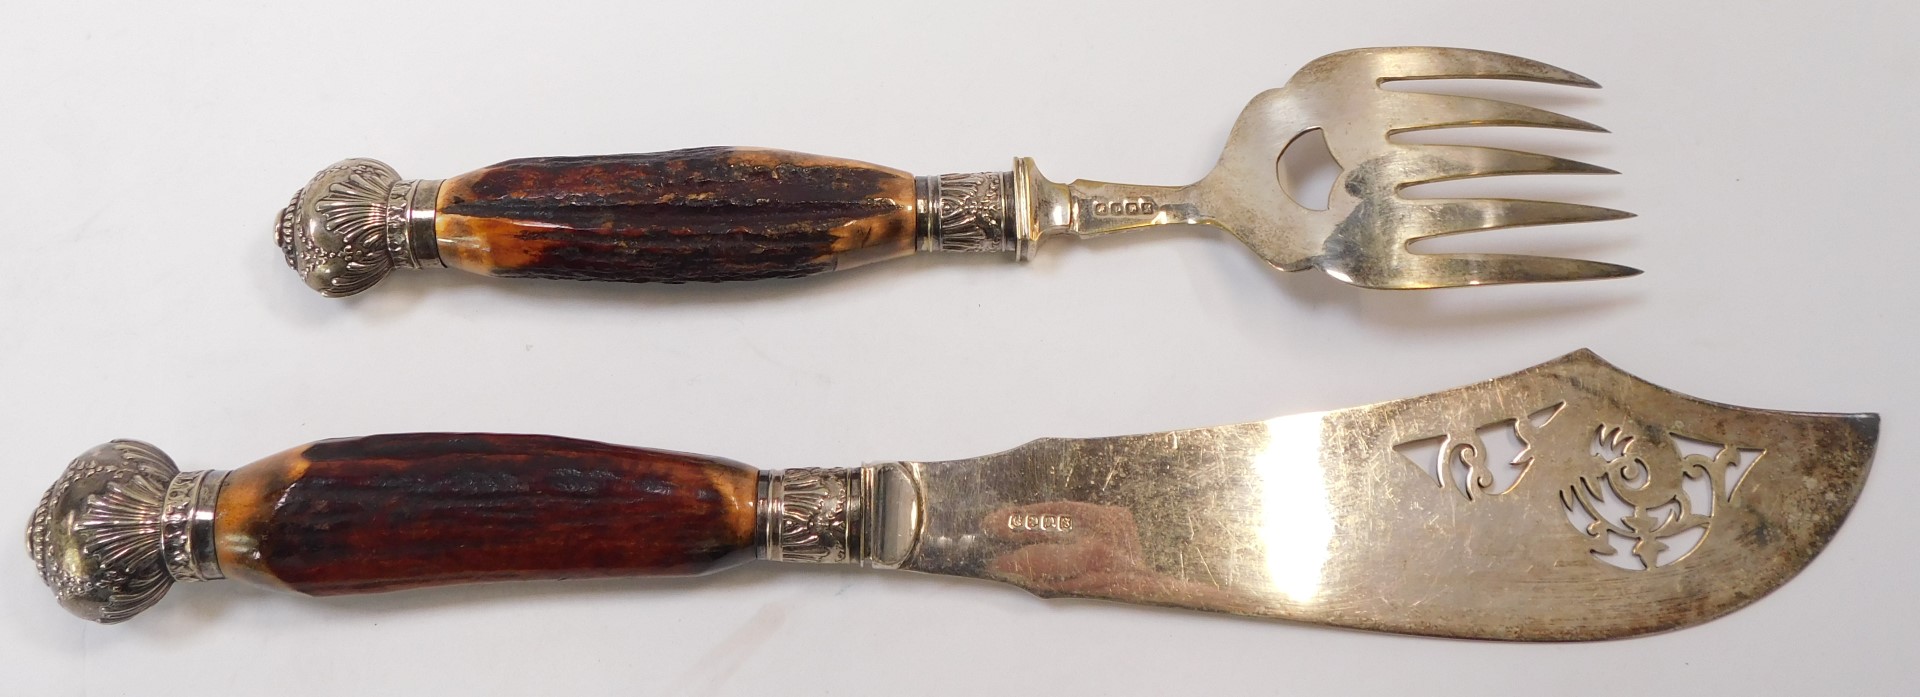 An antler handled fish serving set, with silver plated blades and collars. - Image 2 of 3